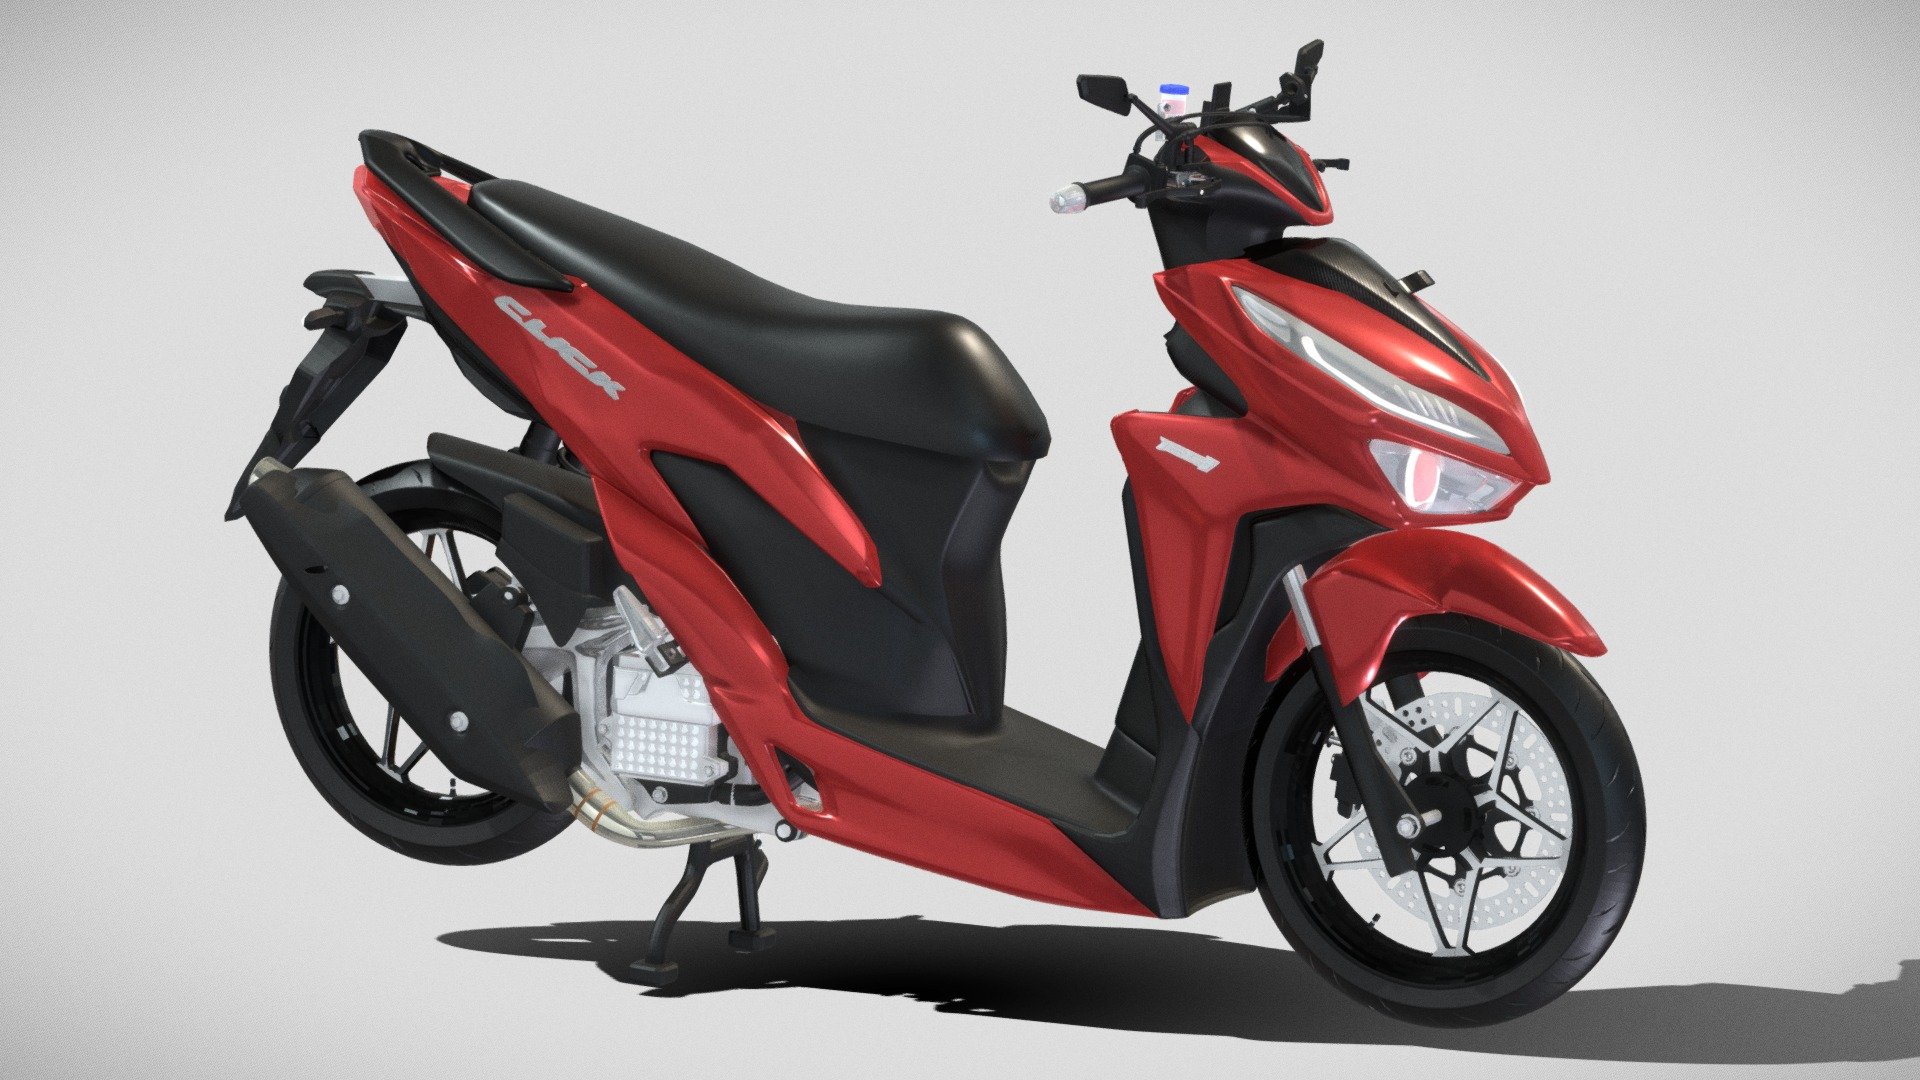 2019 - Honda Click or Vario 125 &amp; 150

I made a 3D model of this motorbike purely by my hand.
I know this motorbike is not standard. but if you want a standard motorbike, you can ask me if you buy it&hellip;

I have replaced the parts on the motorbike:




VND rims

Custom exhaust made in Indonesia

Circuit brand rearview mirror

KTC rear shock with air tube

Custom air filter housing

Phone holder

custom radiator cover

Nissin calipers &amp; after market disks

that's all I know. Thank You..

~ khusus wilayah indonesia ~ 
Harga bisa lebih murah jika anda memesan lewat Instagram ataupun  Whatsapp kami (Untuk nomor Whatsapp bisa anda lihat di profil Instagram kami) - 2019 - Honda Click or Vario 125 & 150 - Buy Royalty Free 3D model by Miftah_firman 3d model